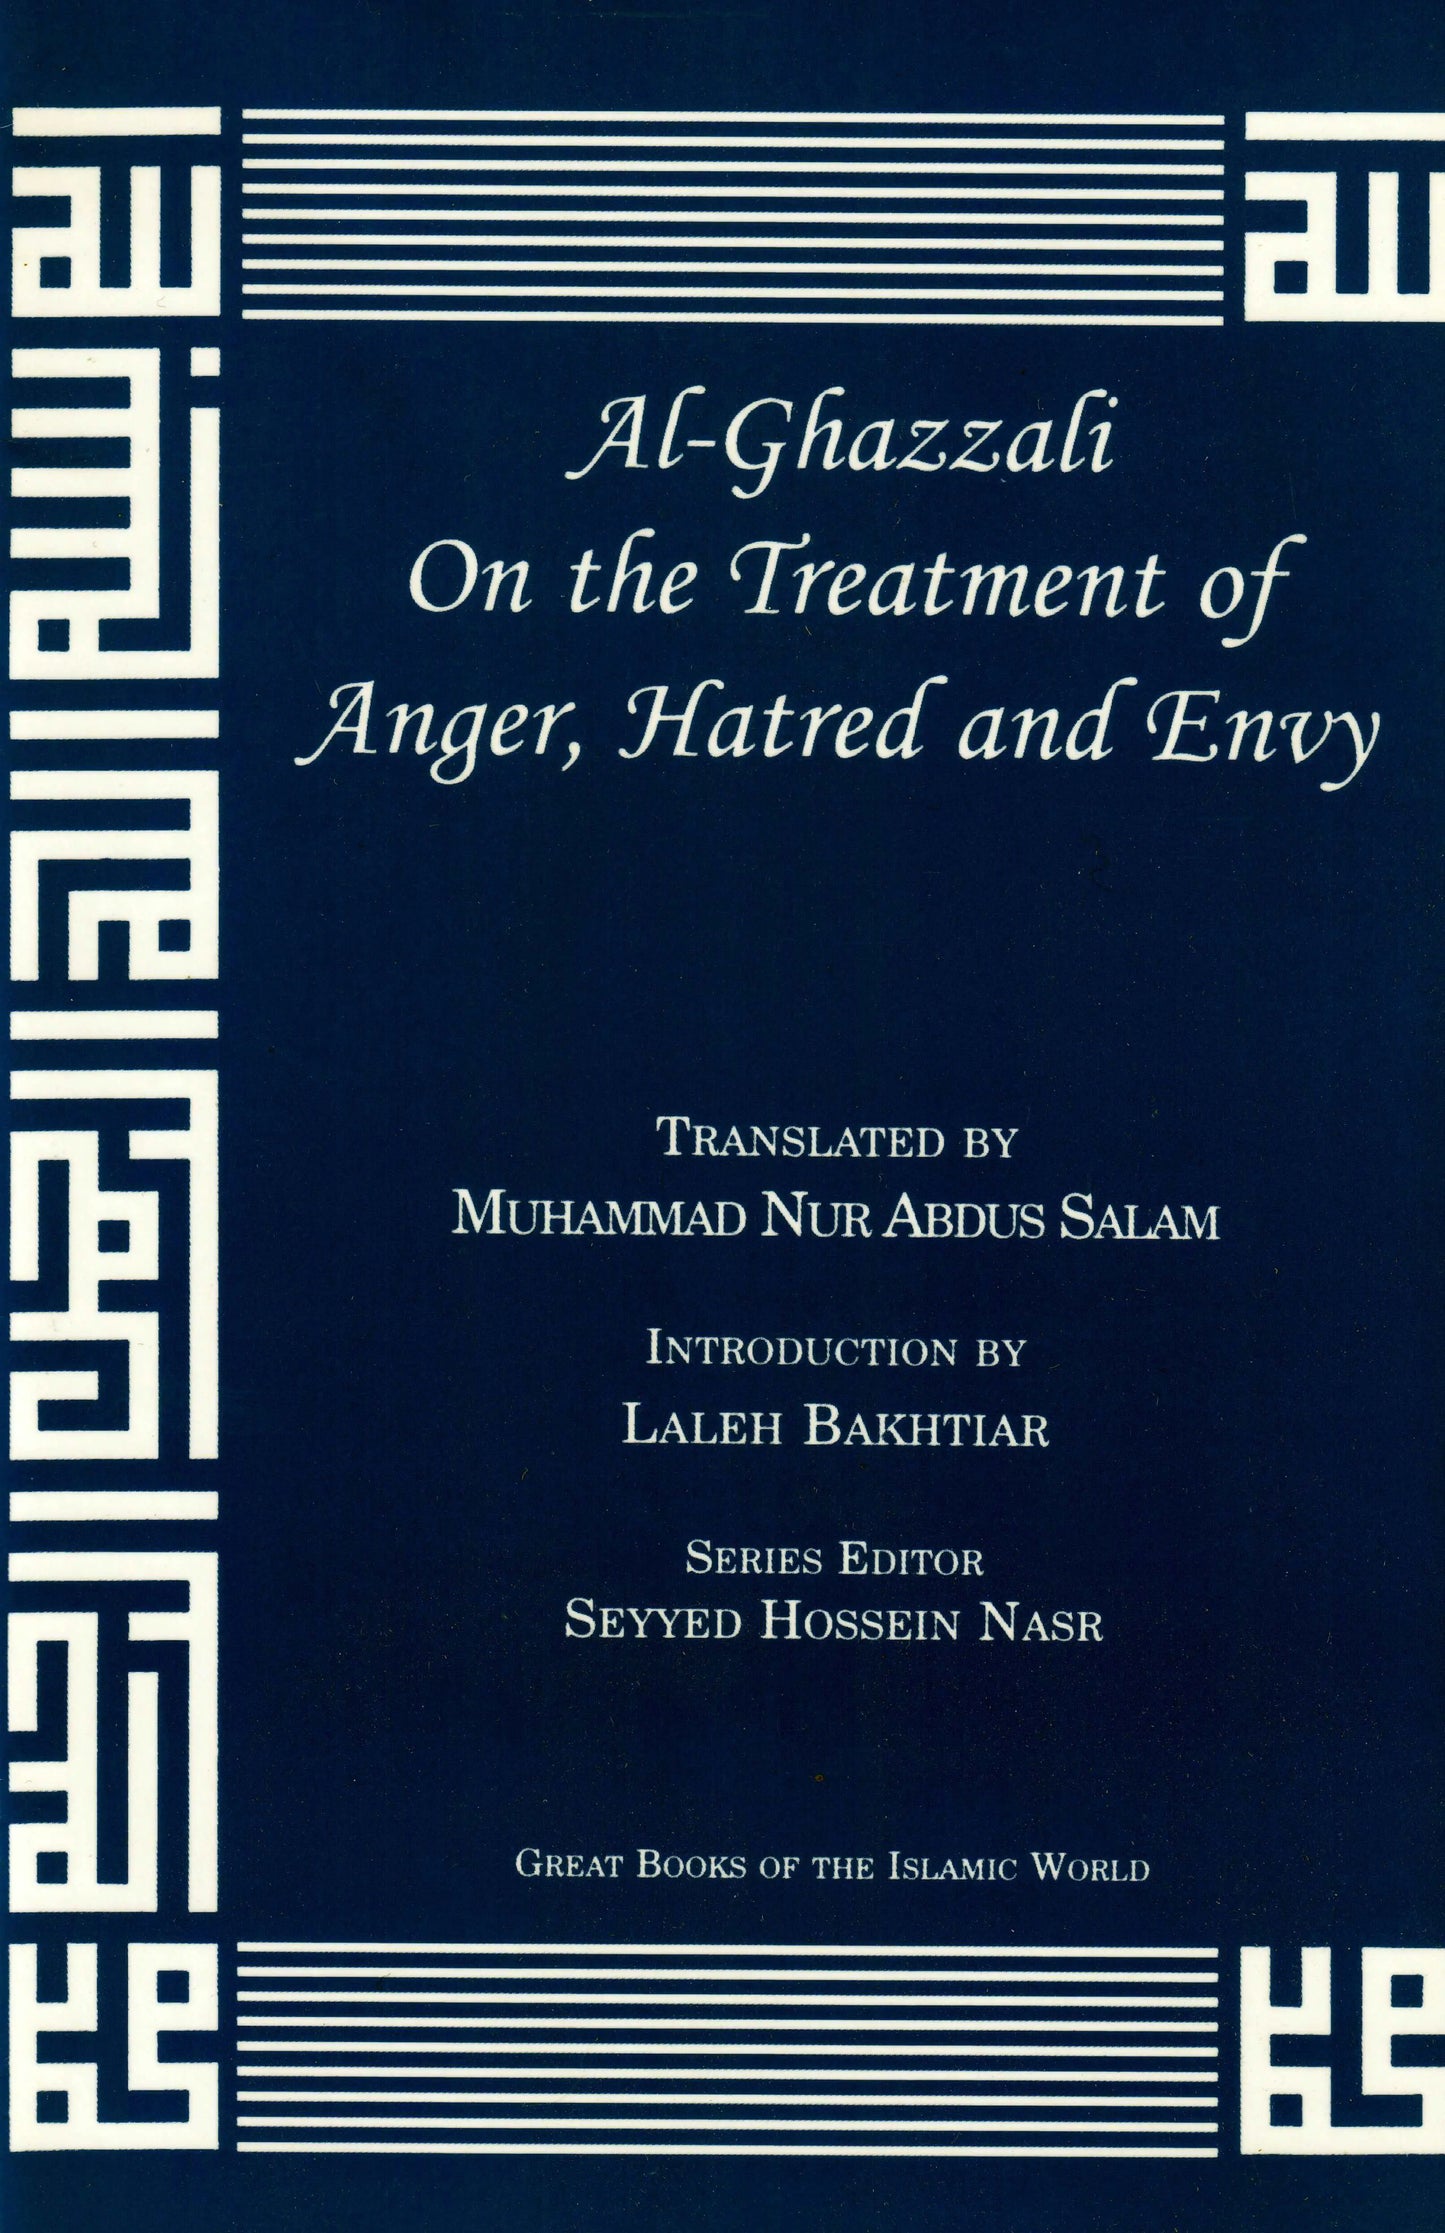 Al-Ghazzali On The Treatment Of Anger, Hatred And Envy